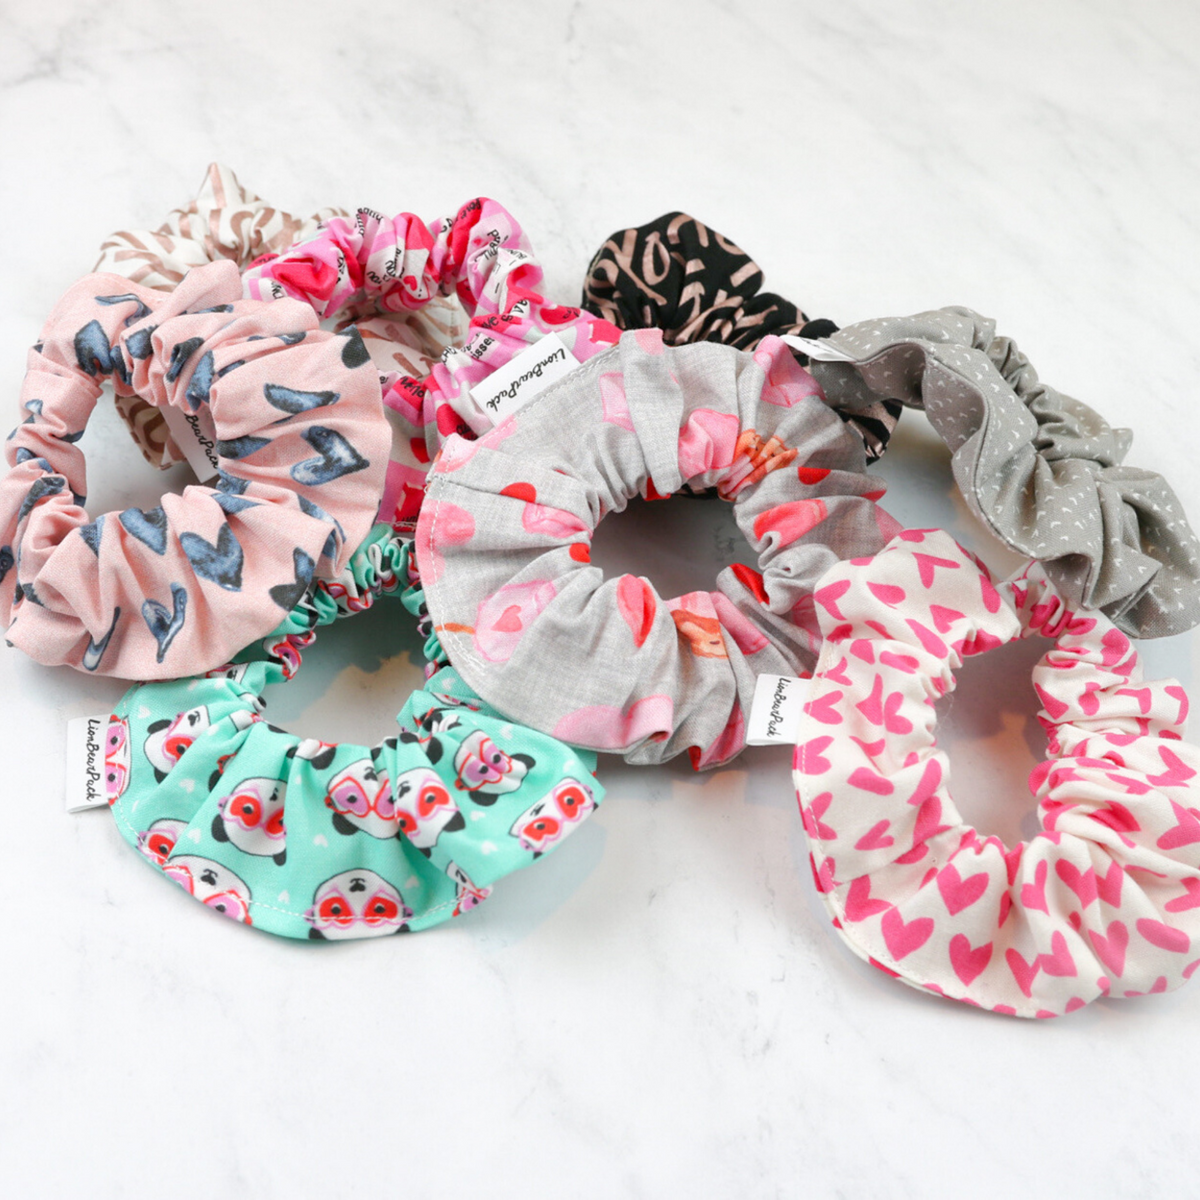 Valentines Scrunchies Pack Sets I Pick Your Own Set